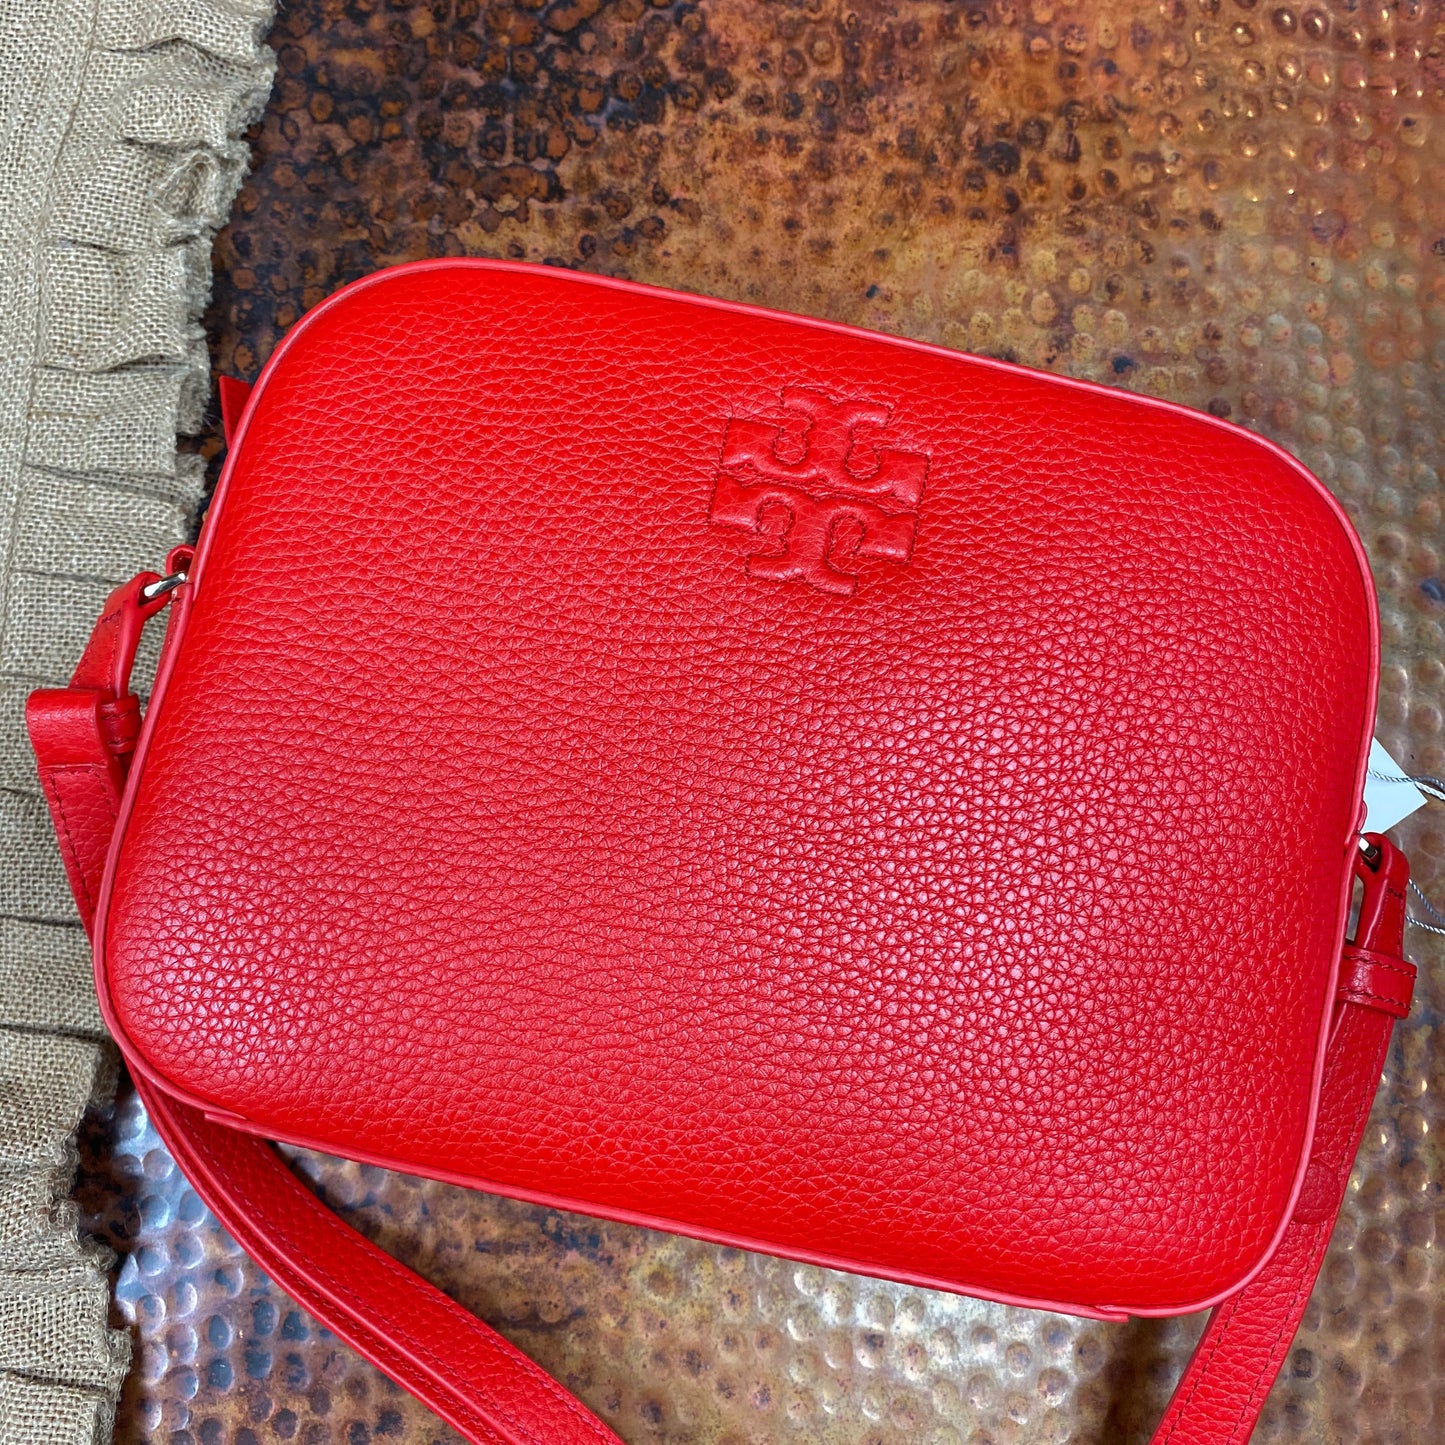 Tory Burch Thea Red Leather Convertible Bag